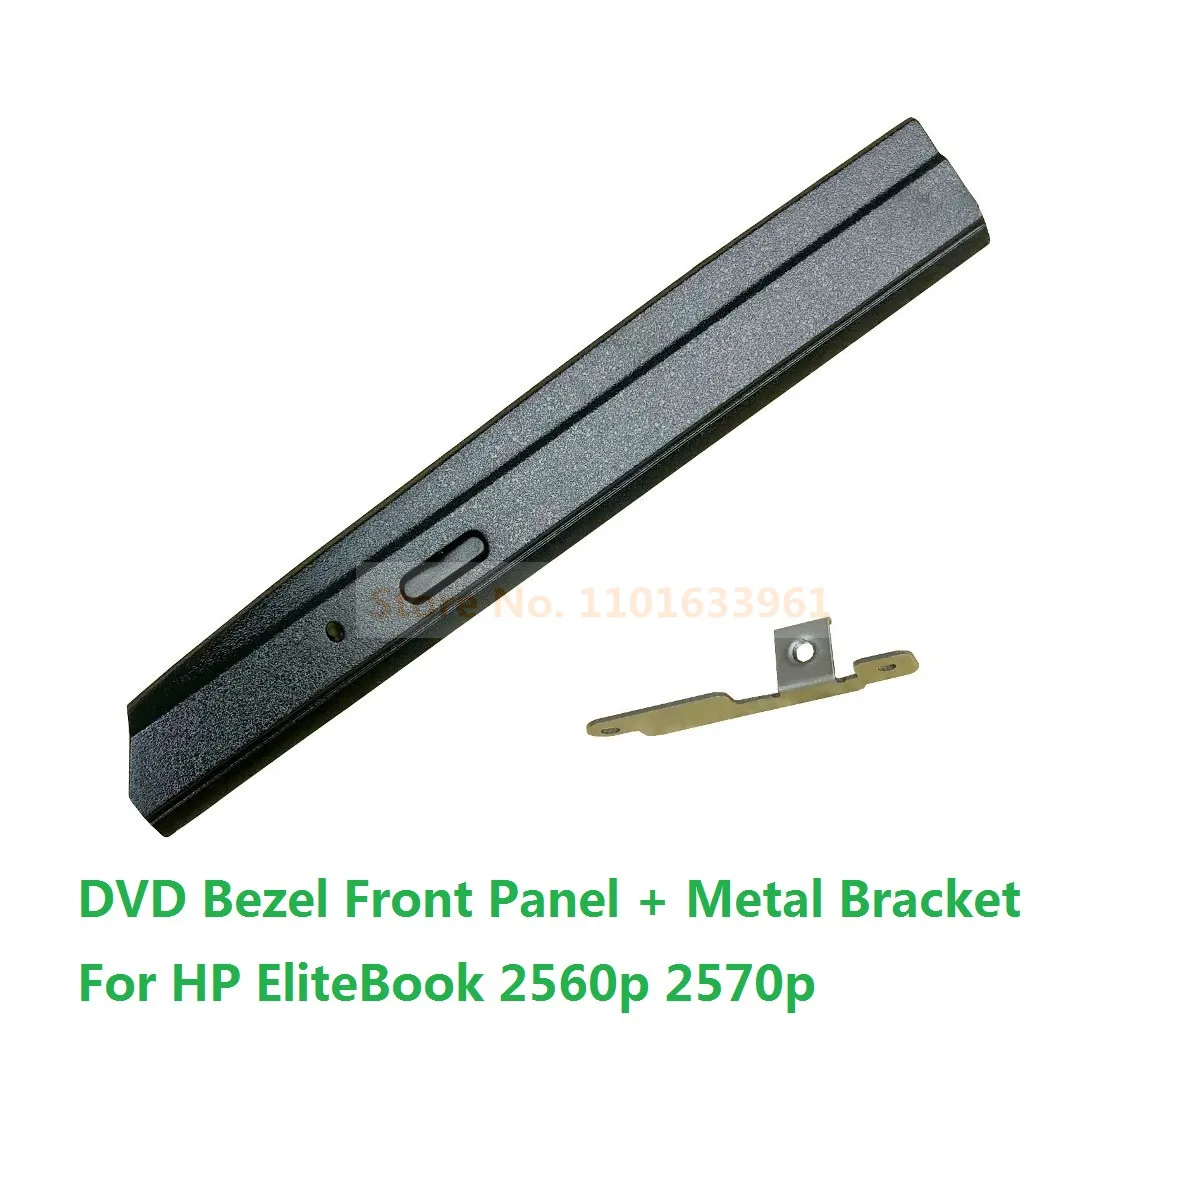 

DVD ODD Optical Drive Bezel Front Panel Faceplate Caddy Cover Mounting Metal Bracket for HP EliteBook 2560p 2570p